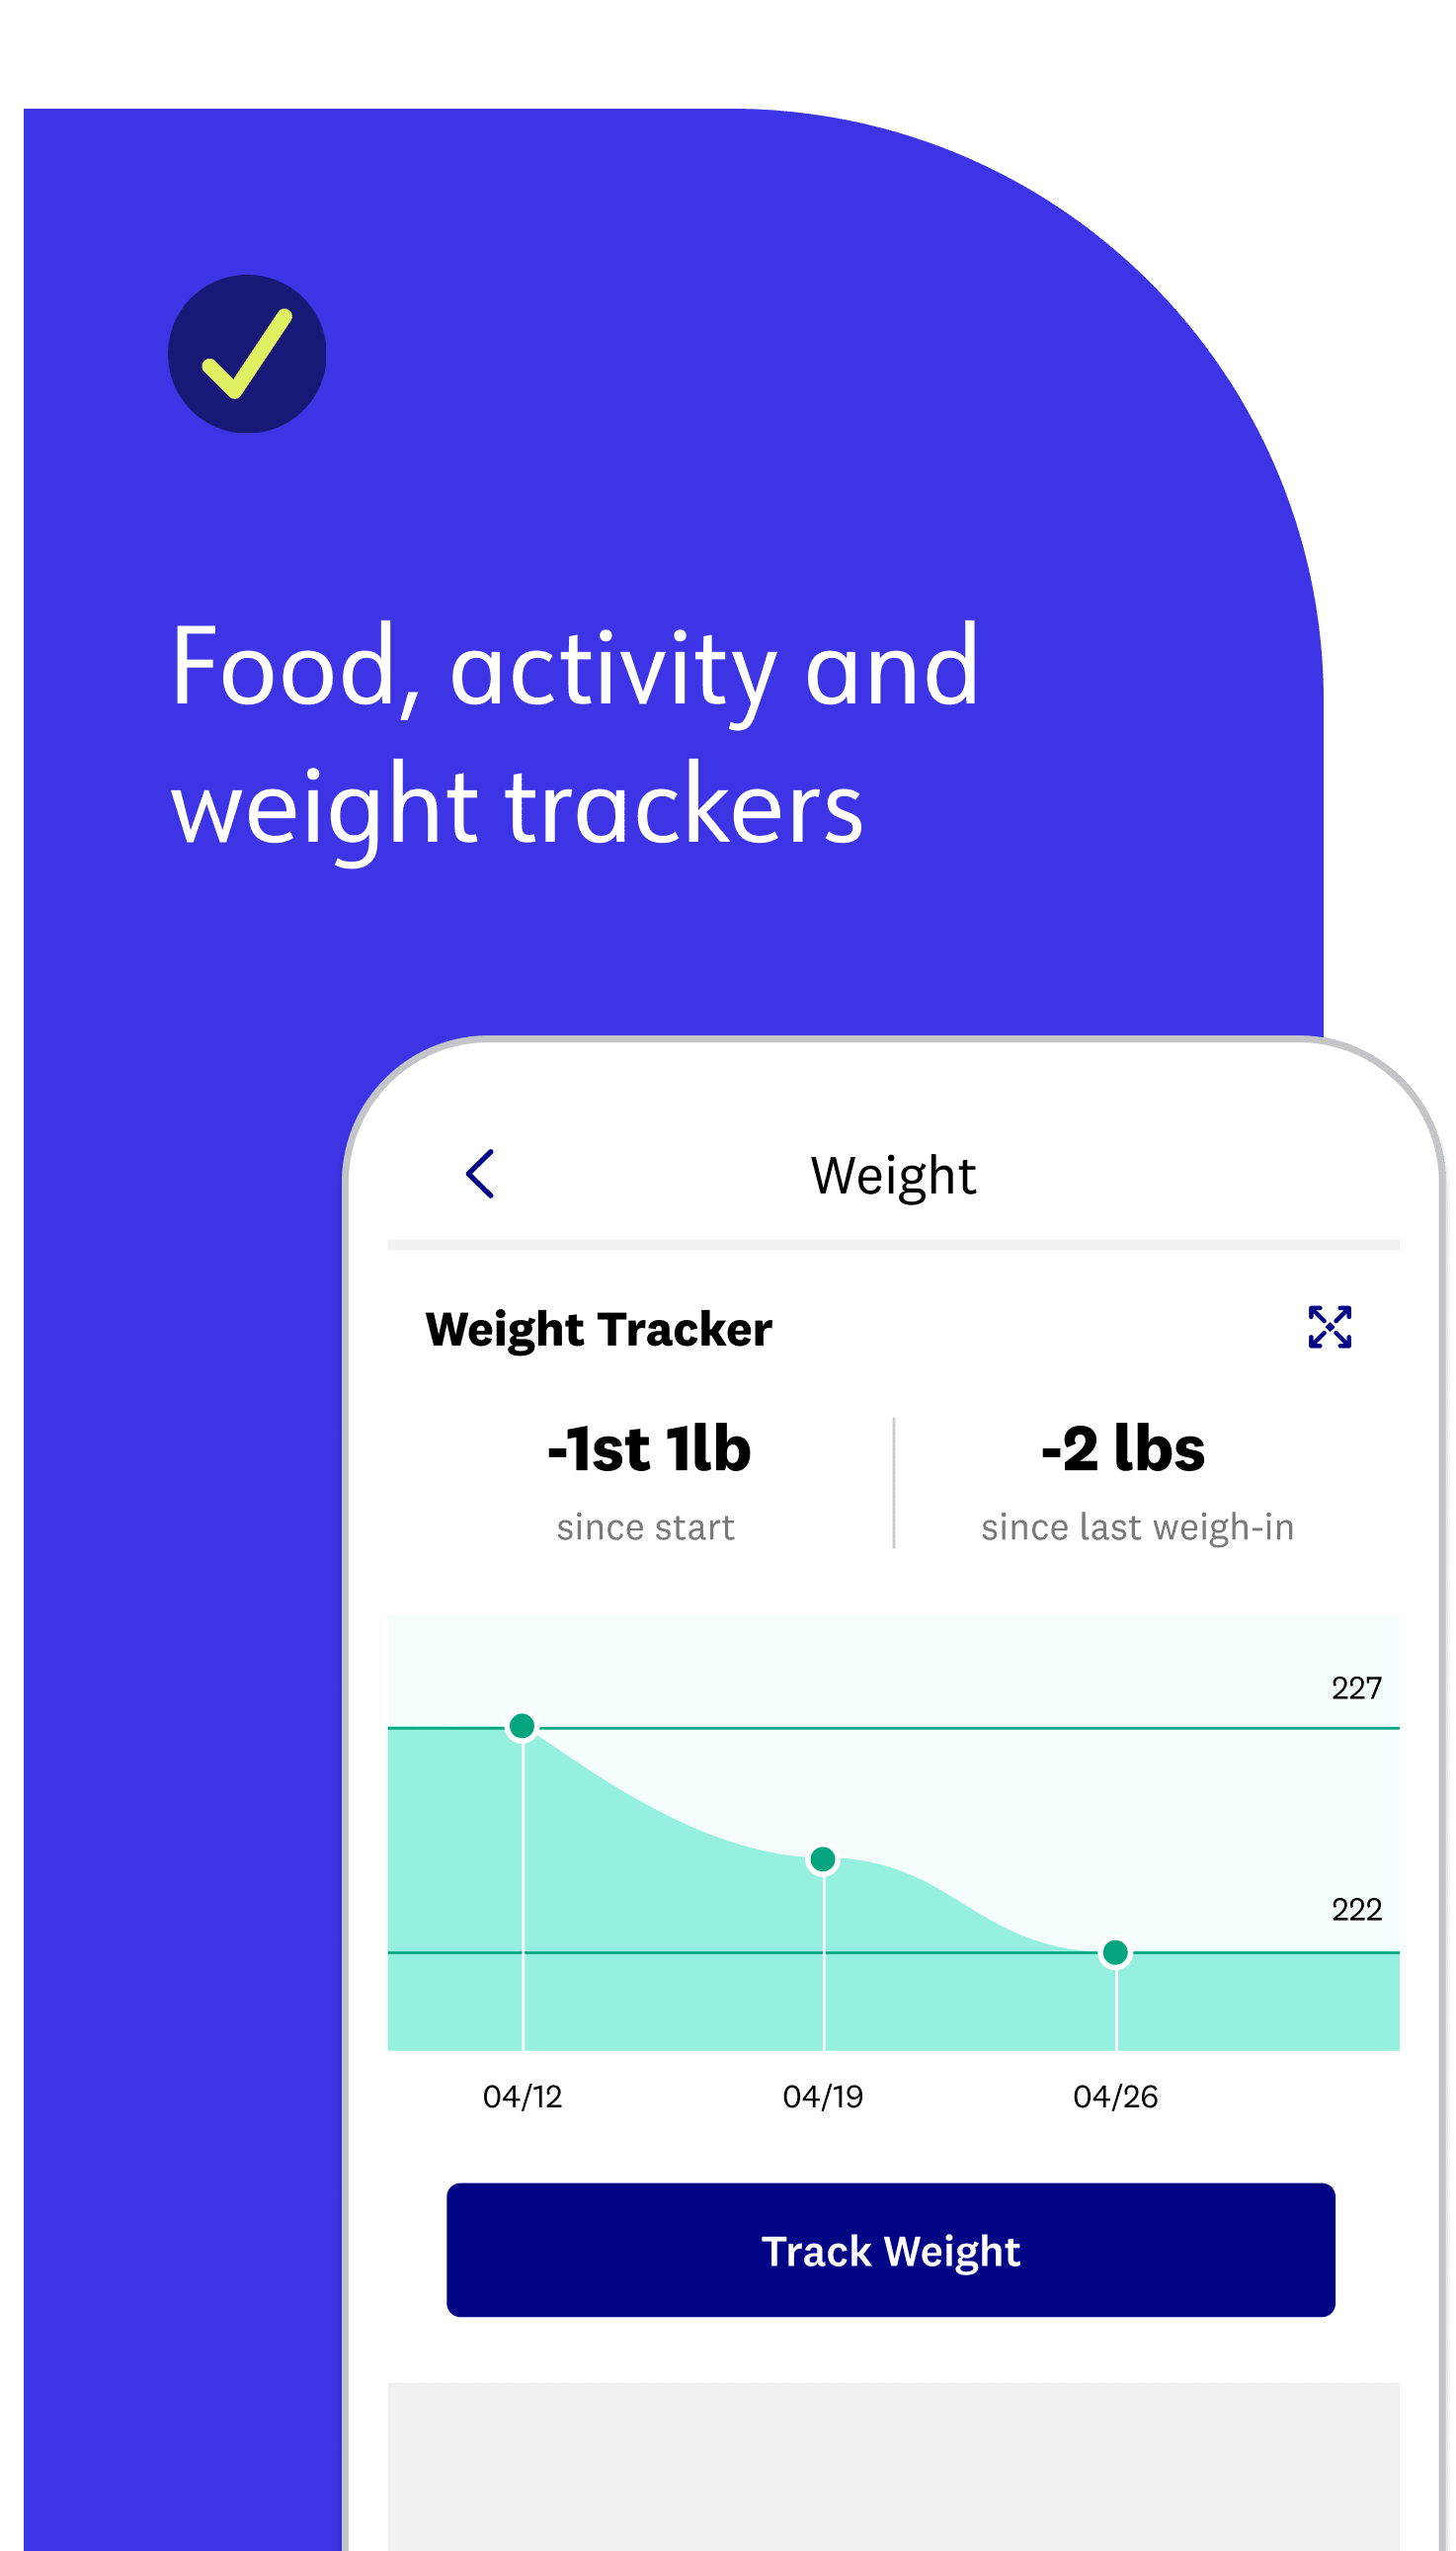 Food, activity and weight trackers